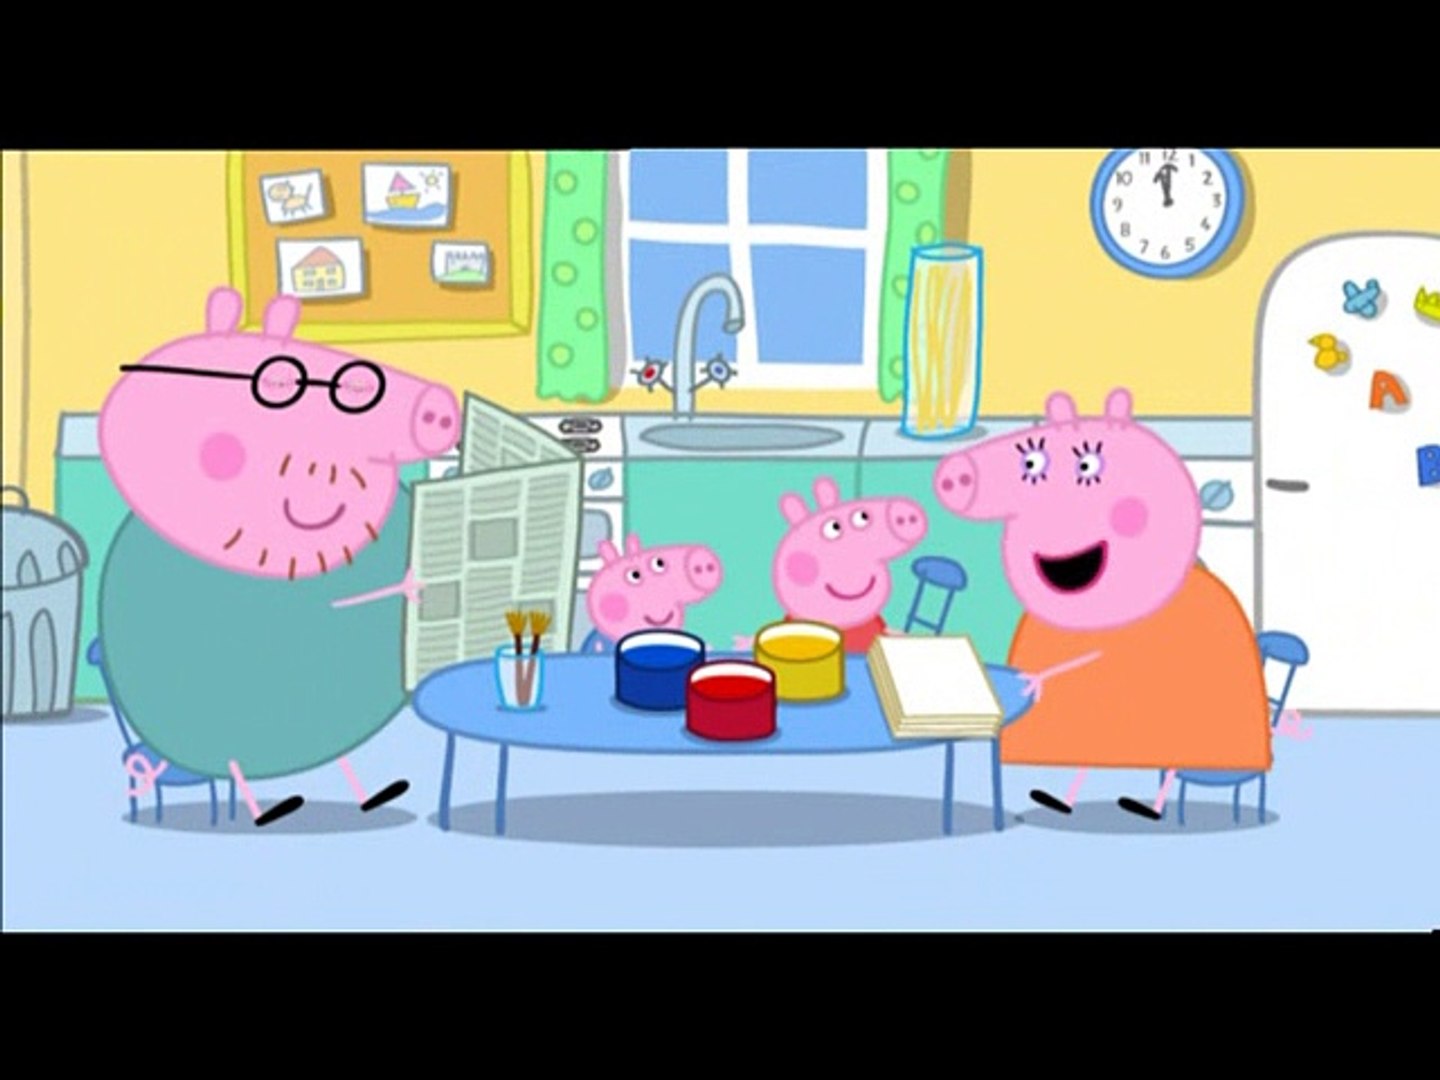 Painting Pictures wit hPeppa Pig 